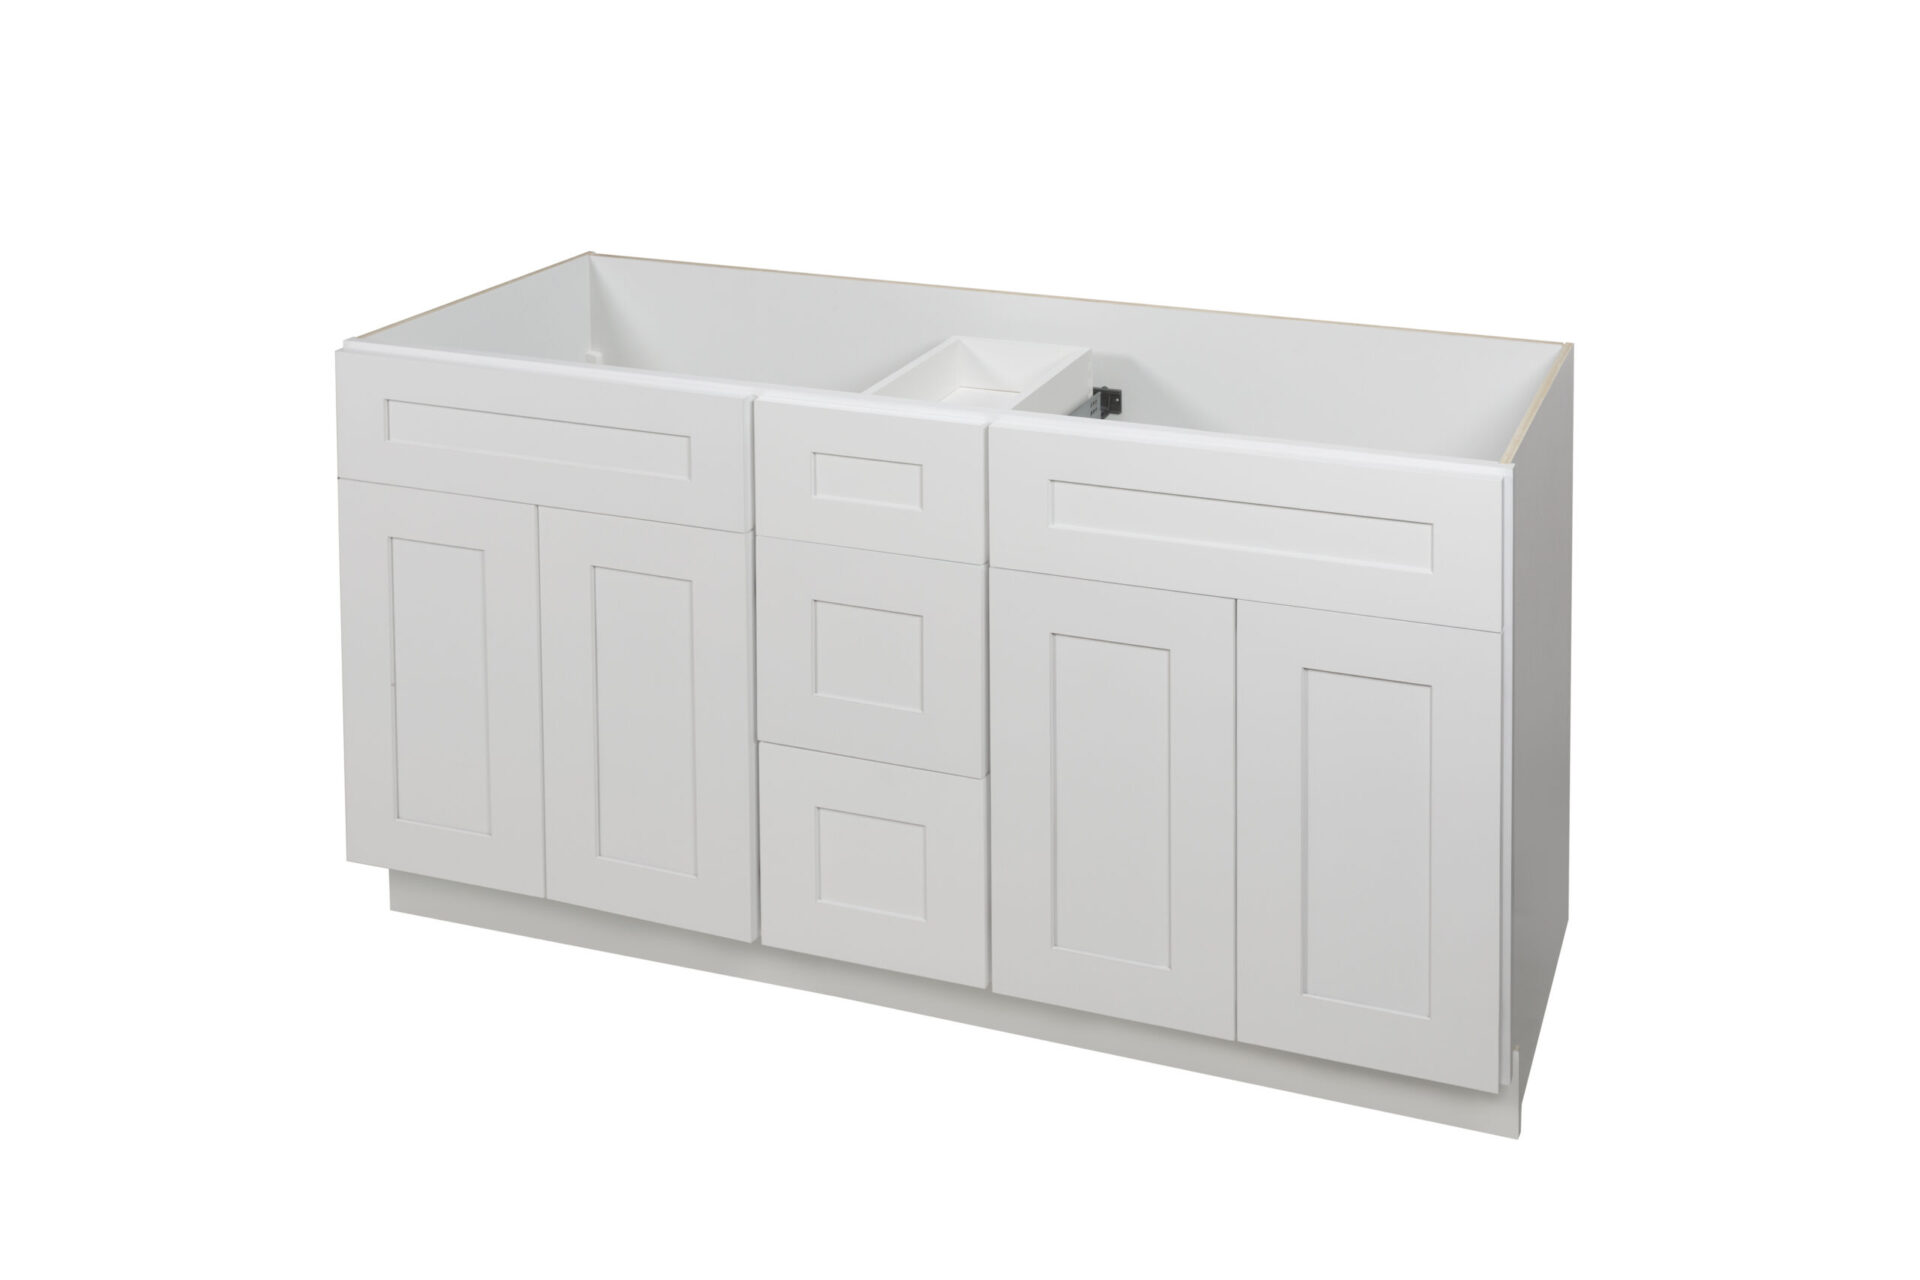 Double Sink Vanity with Drawers -ELEGANT WHITE - Cabinet Deals